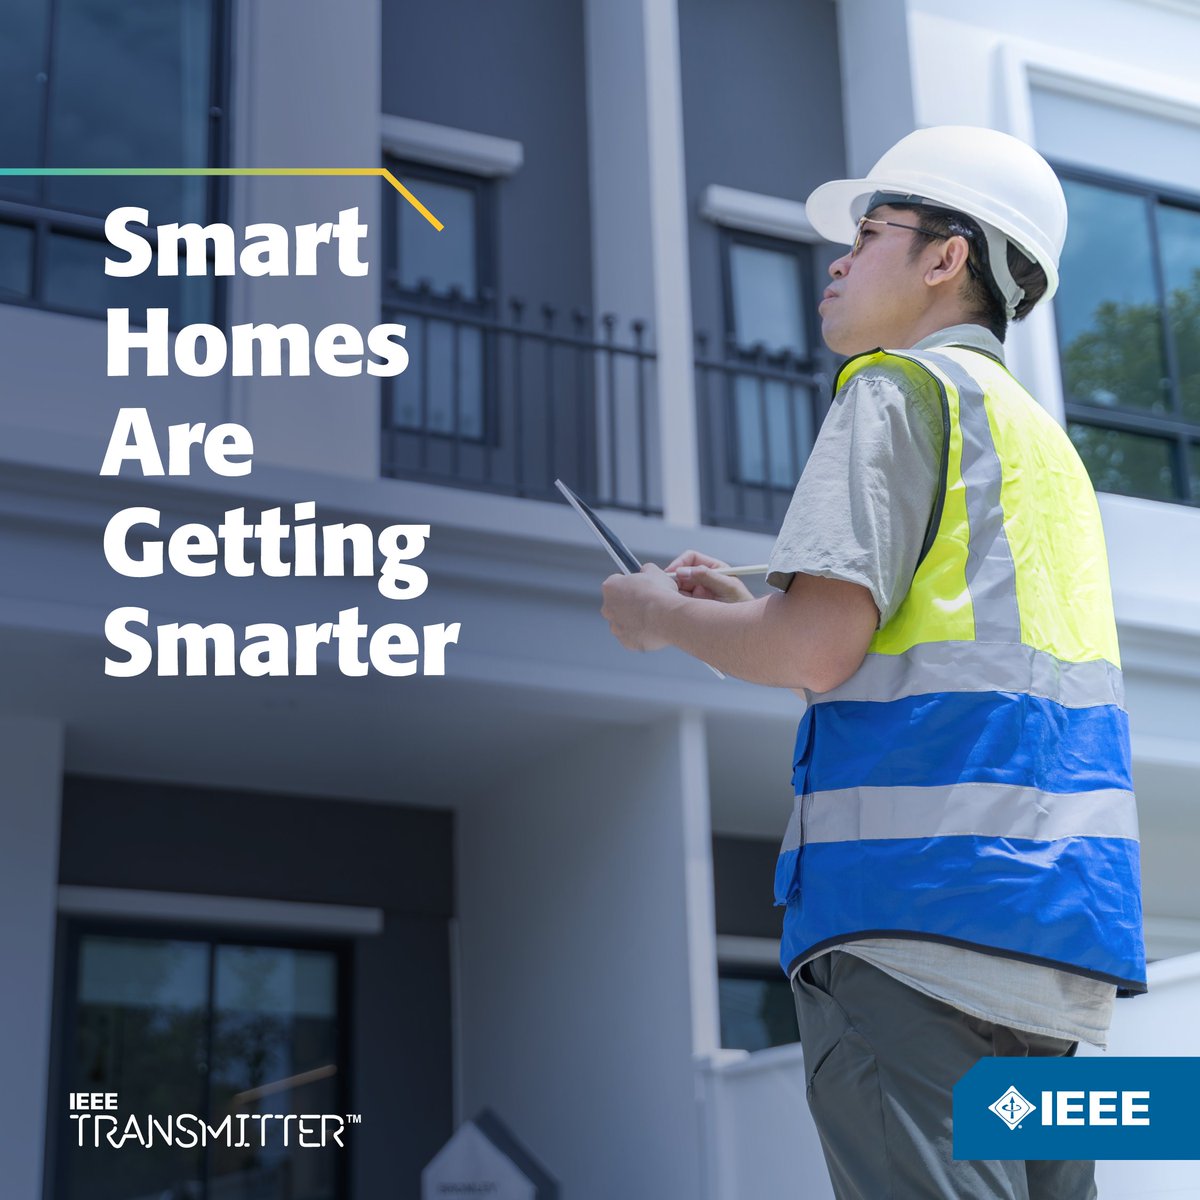 Smart home devices are helping our living spaces become more comfortable and convenient. Could these same technologies be used to help assess a home's structural integrity? Learn more about structural health monitoring sensors on #IEEE Transmitter: bit.ly/4biEAXo